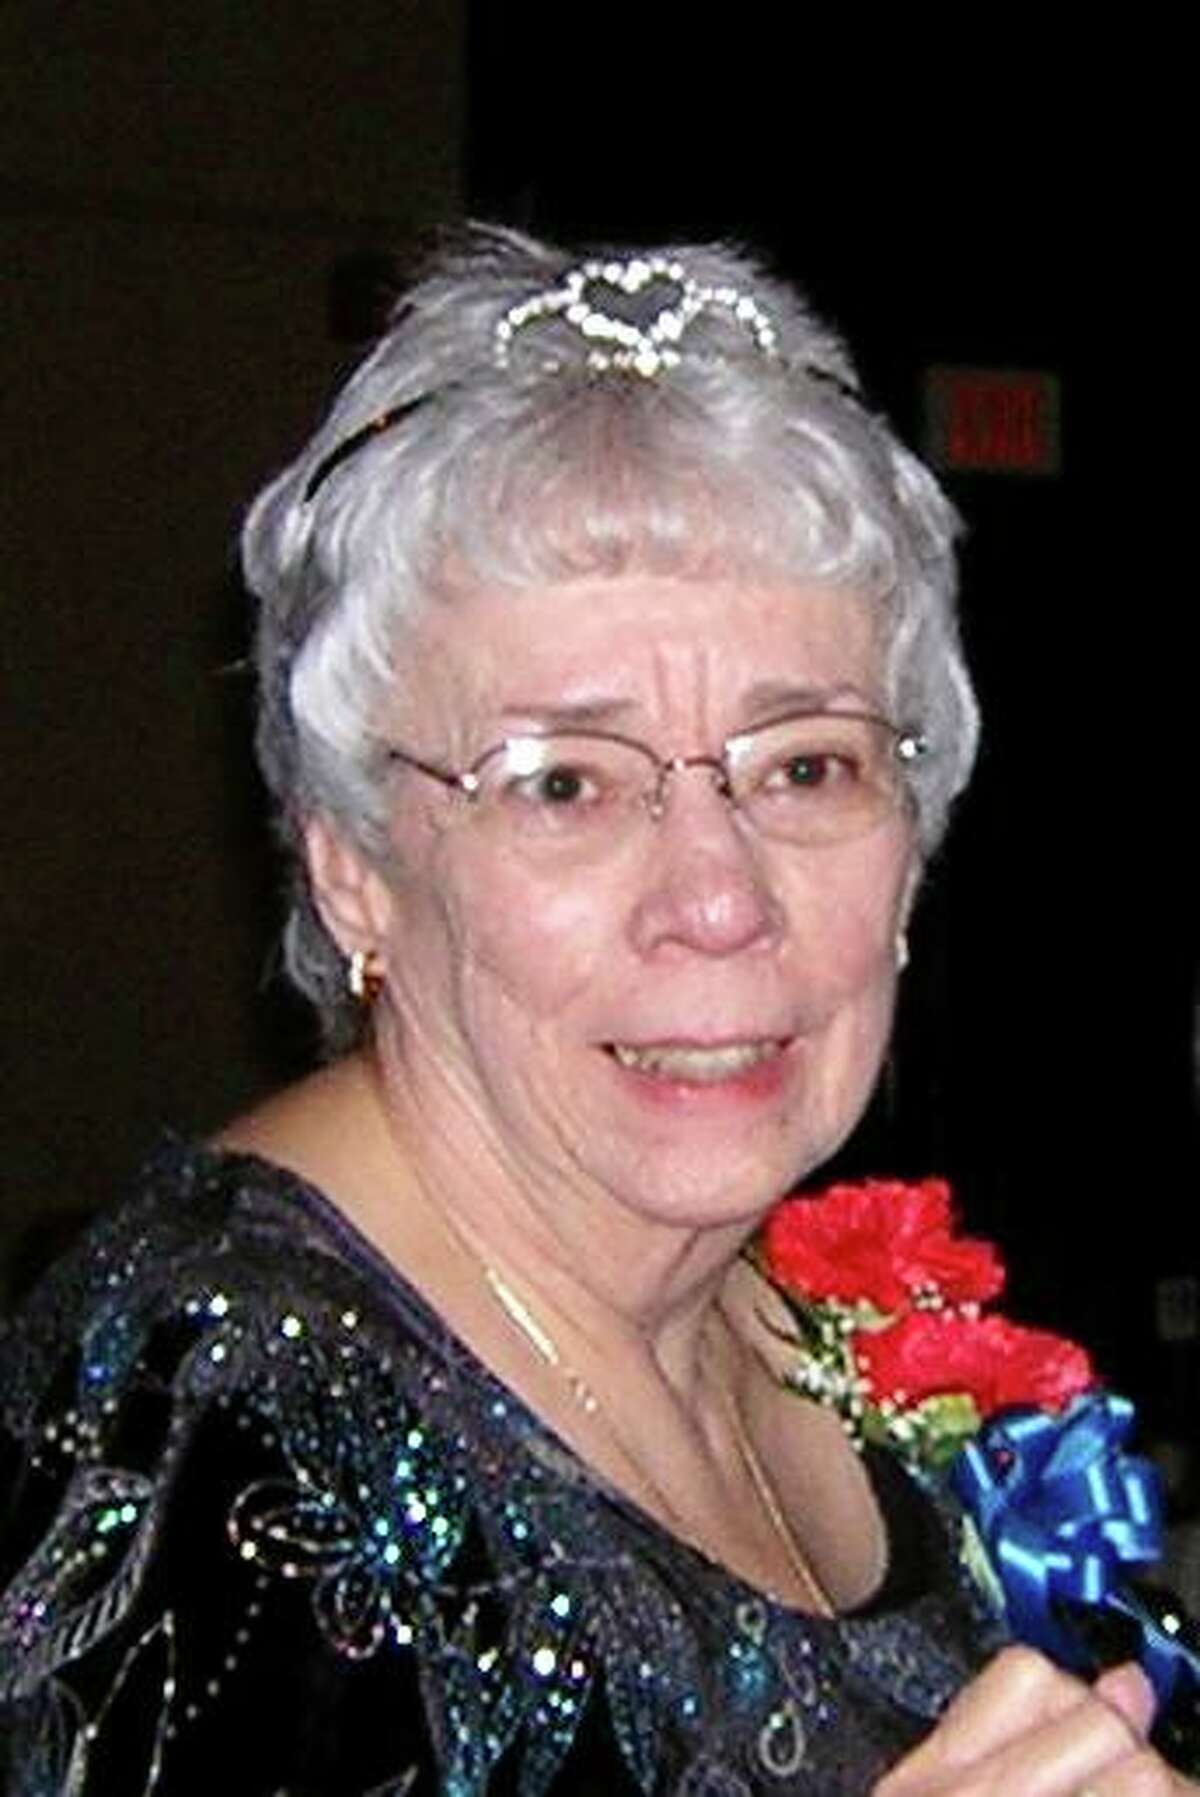 Dian Thomasson, Alvin resident and 52-year member of Beta Sigma Phi’s Theta Master chapter, died July 23. “Her loving and nurturing nature will be sorely missed,” member Linda Abbott wrote in a press release. For information about the group, contact Leslie Von Bergen, 903-891-0990.